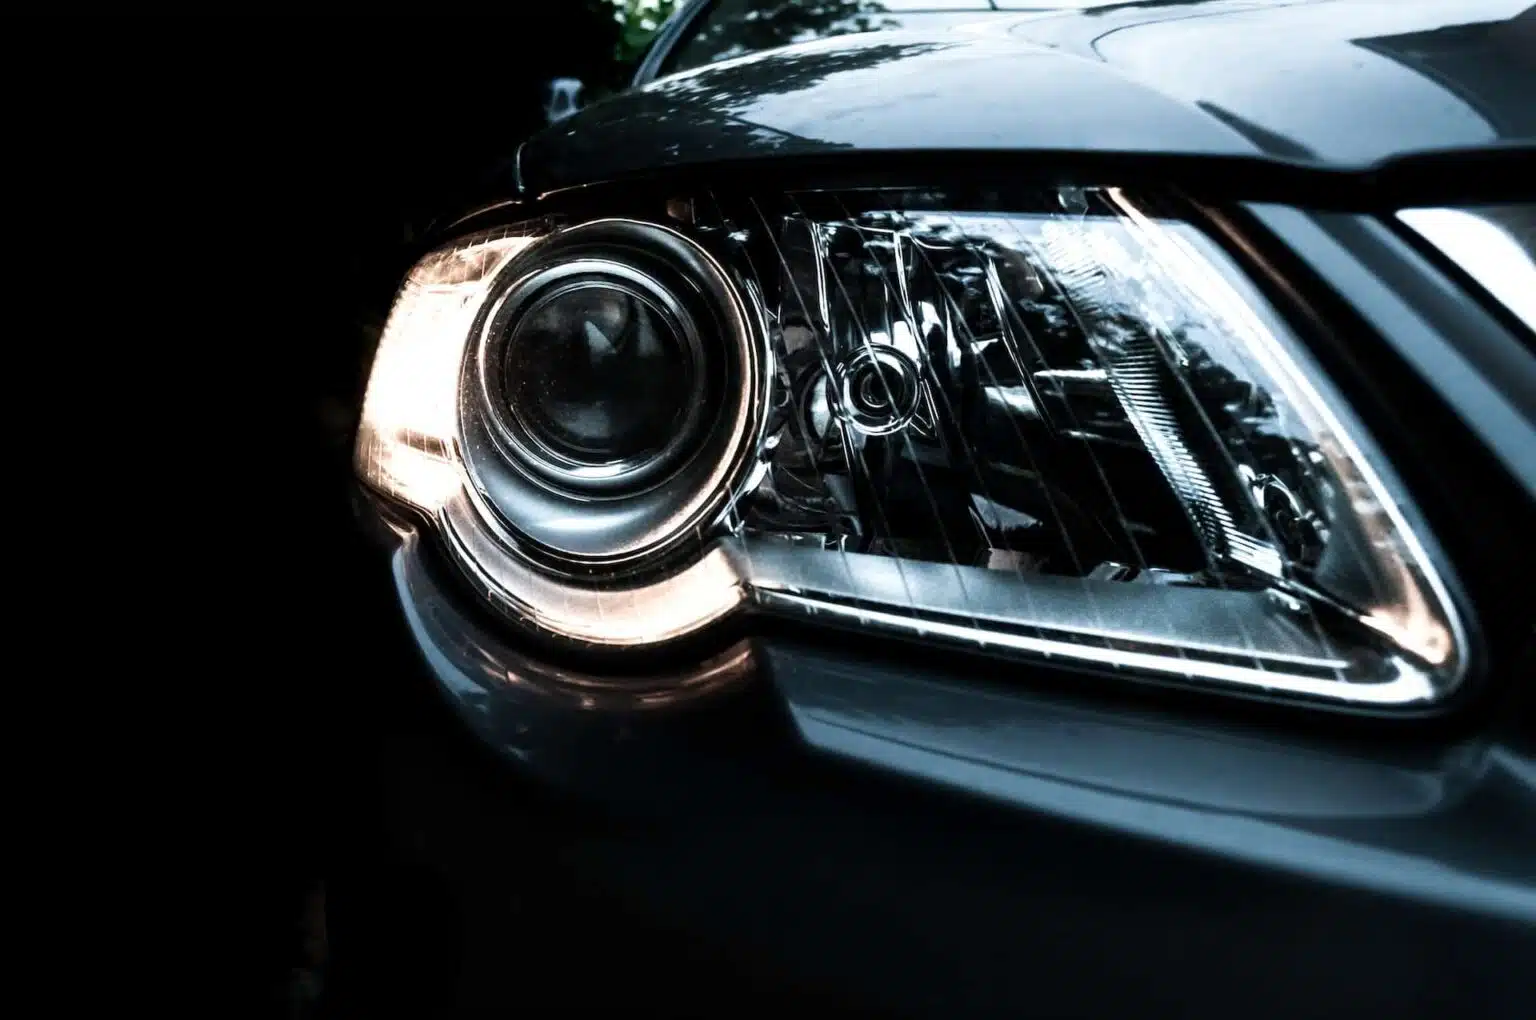 How does a projector headlight work?